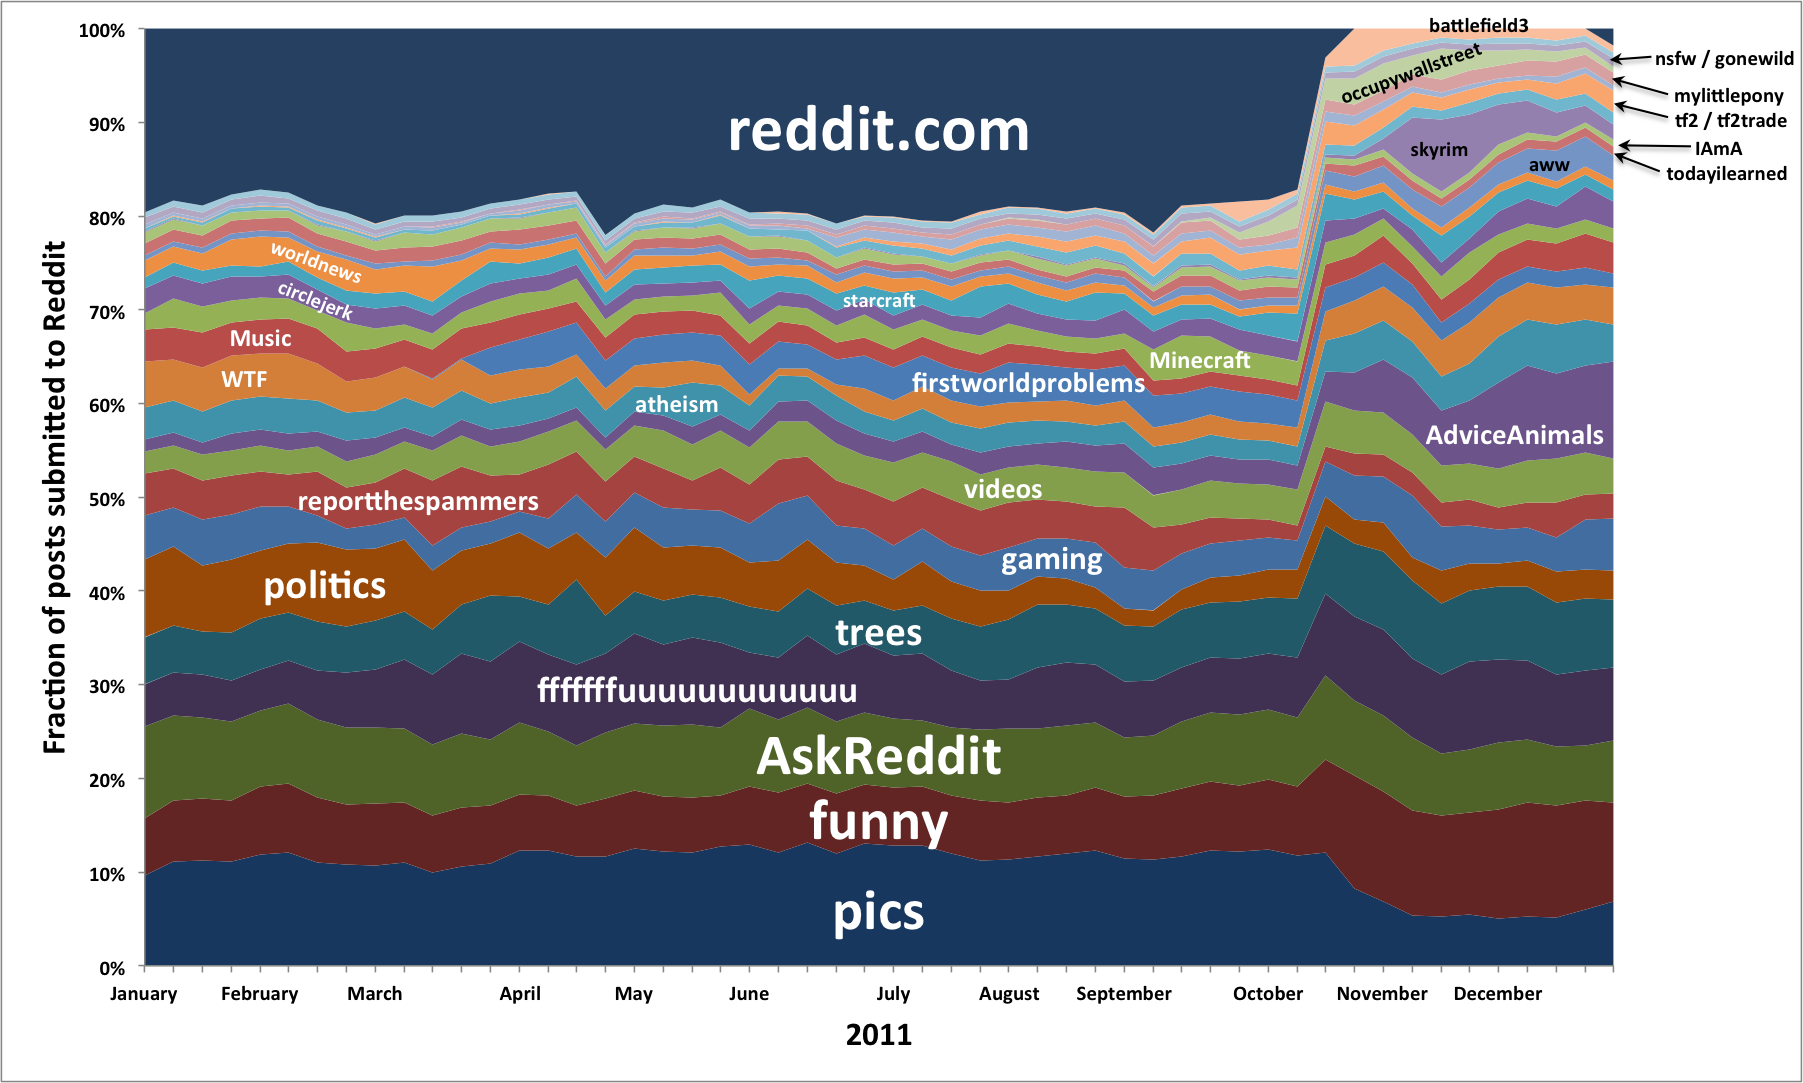 2011 - The Year the /r/reddit.com Died